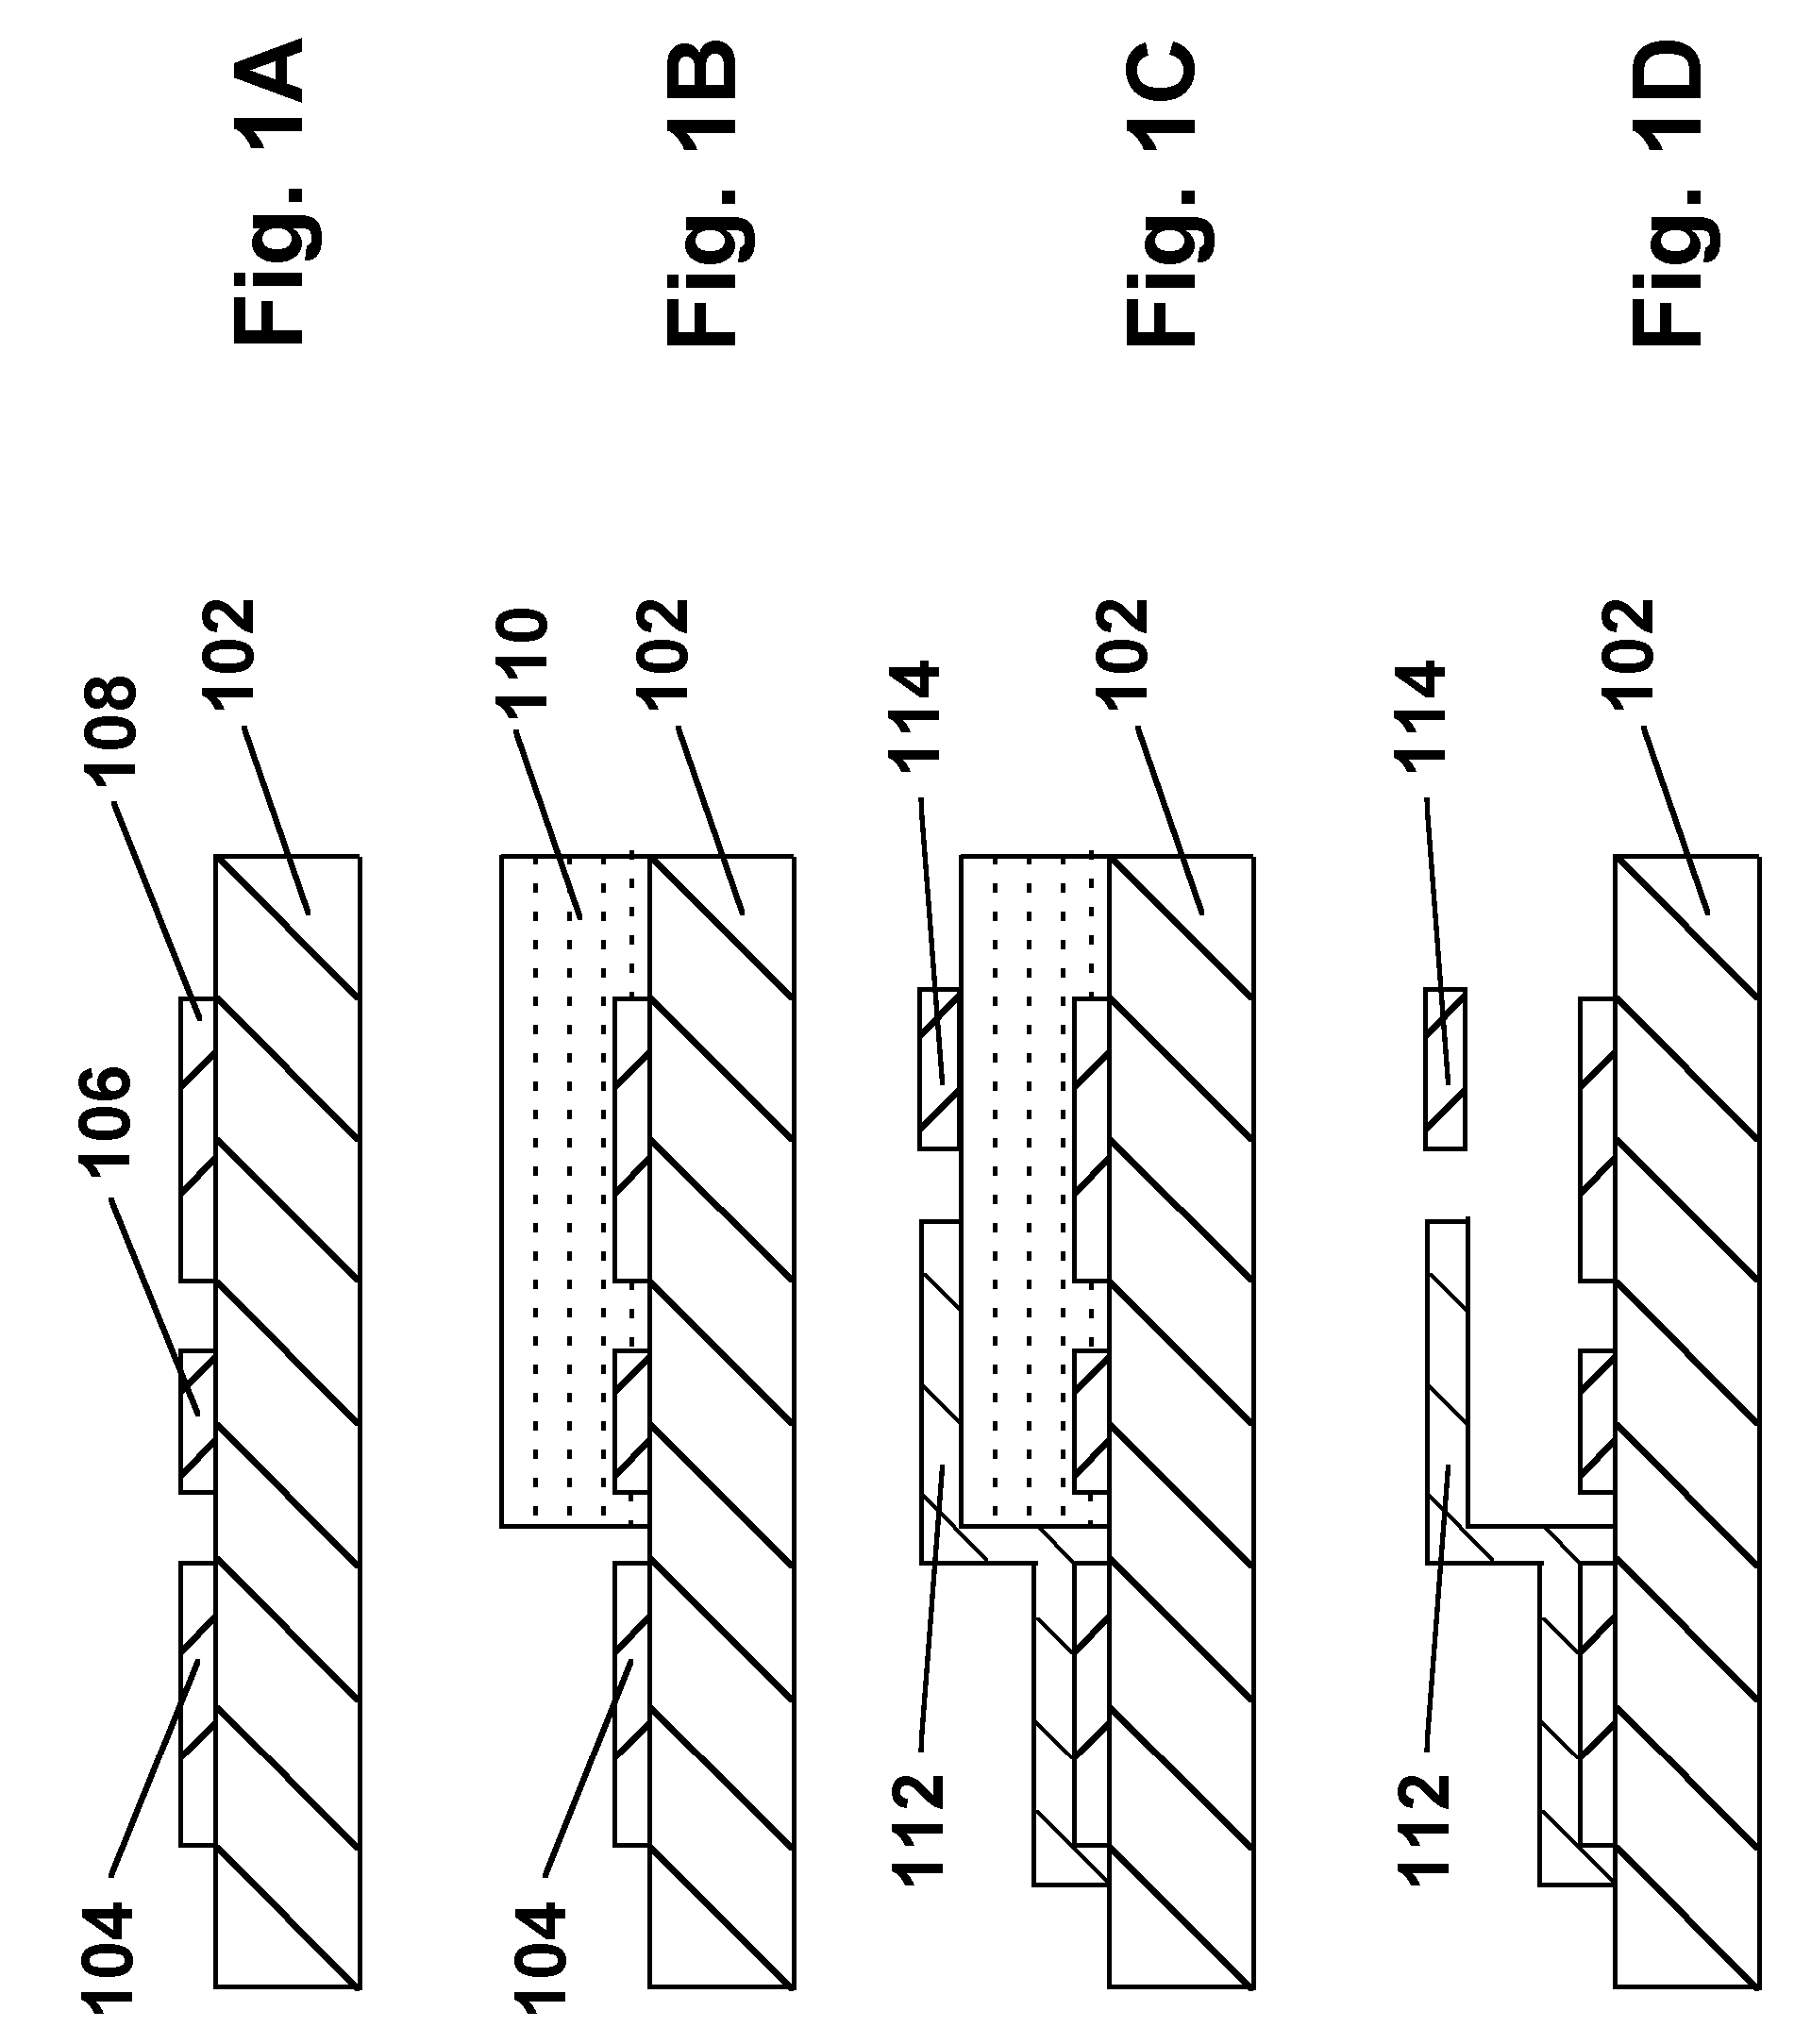 Backplanes for electro-optic displays